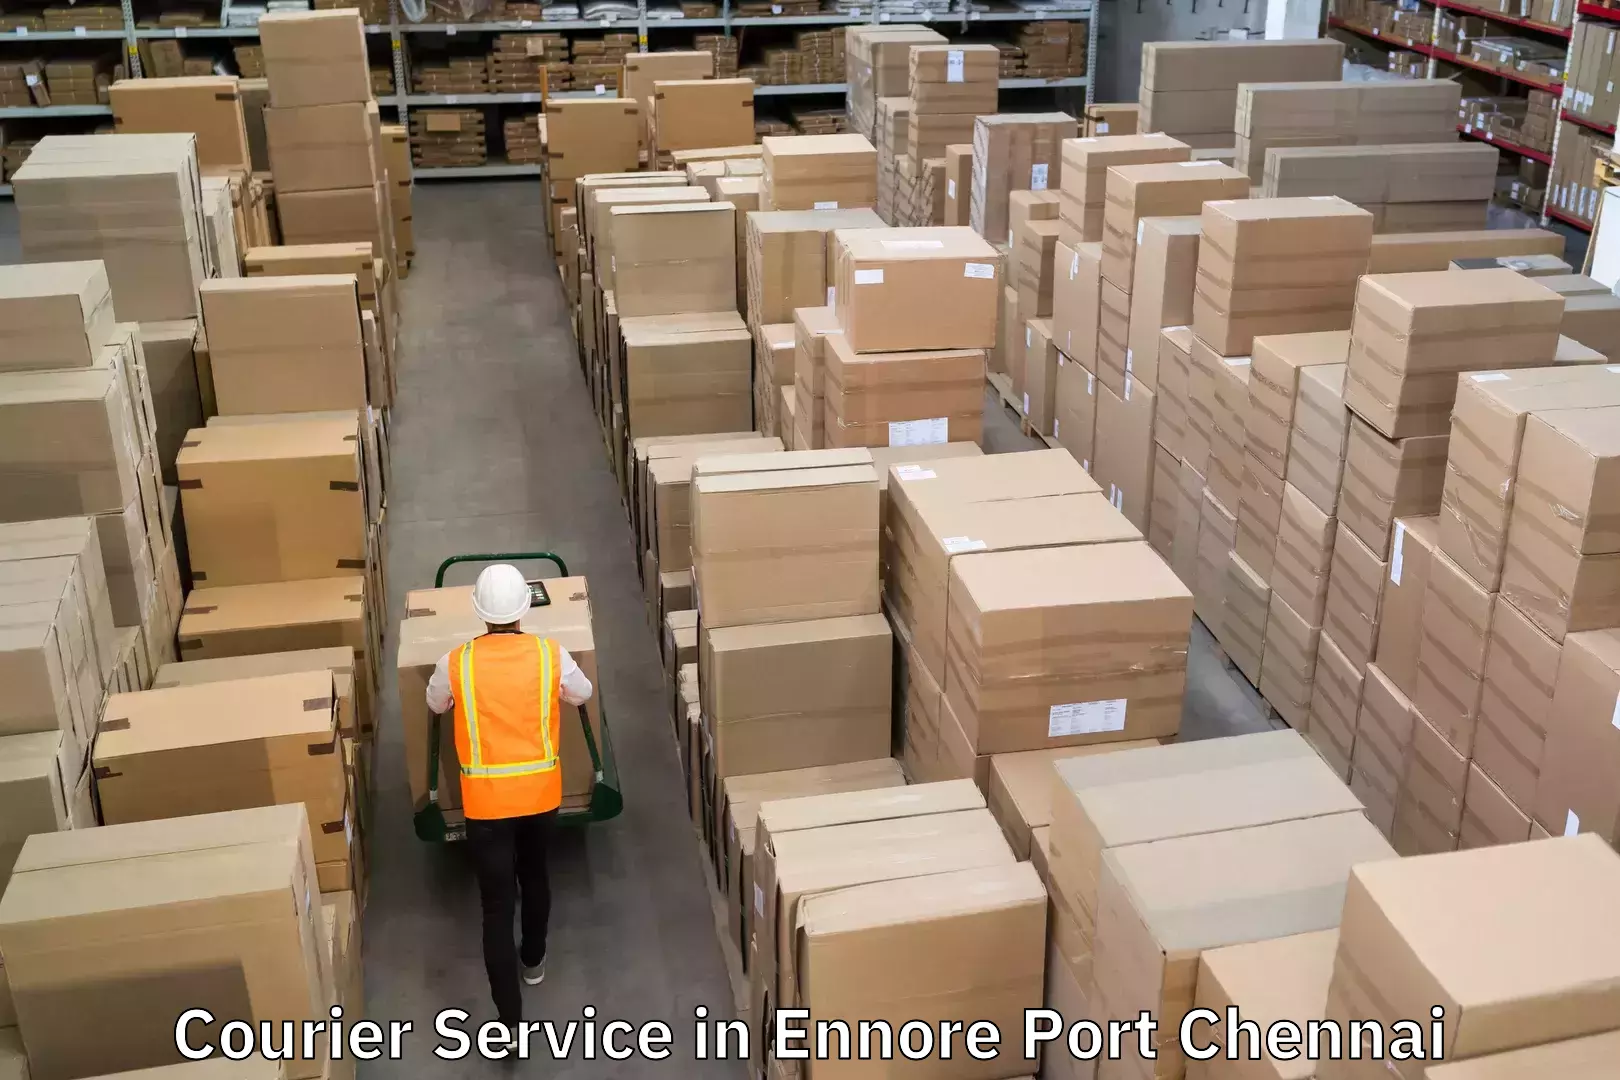 Smart shipping technology in Ennore Port Chennai